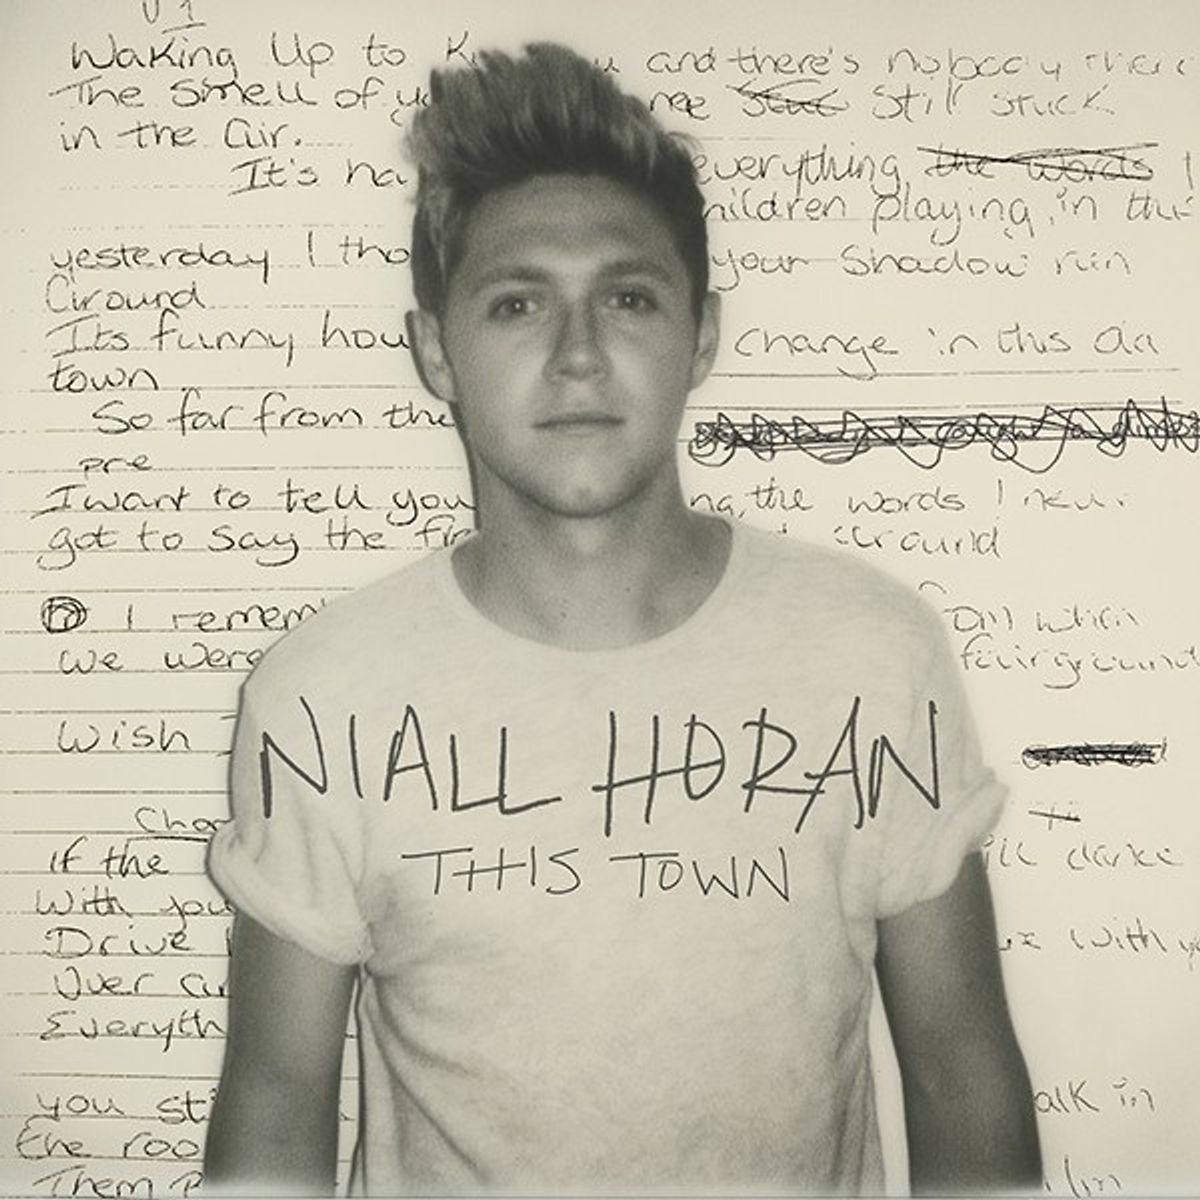 Niall Horan Drops First Solo Single 'This Town'